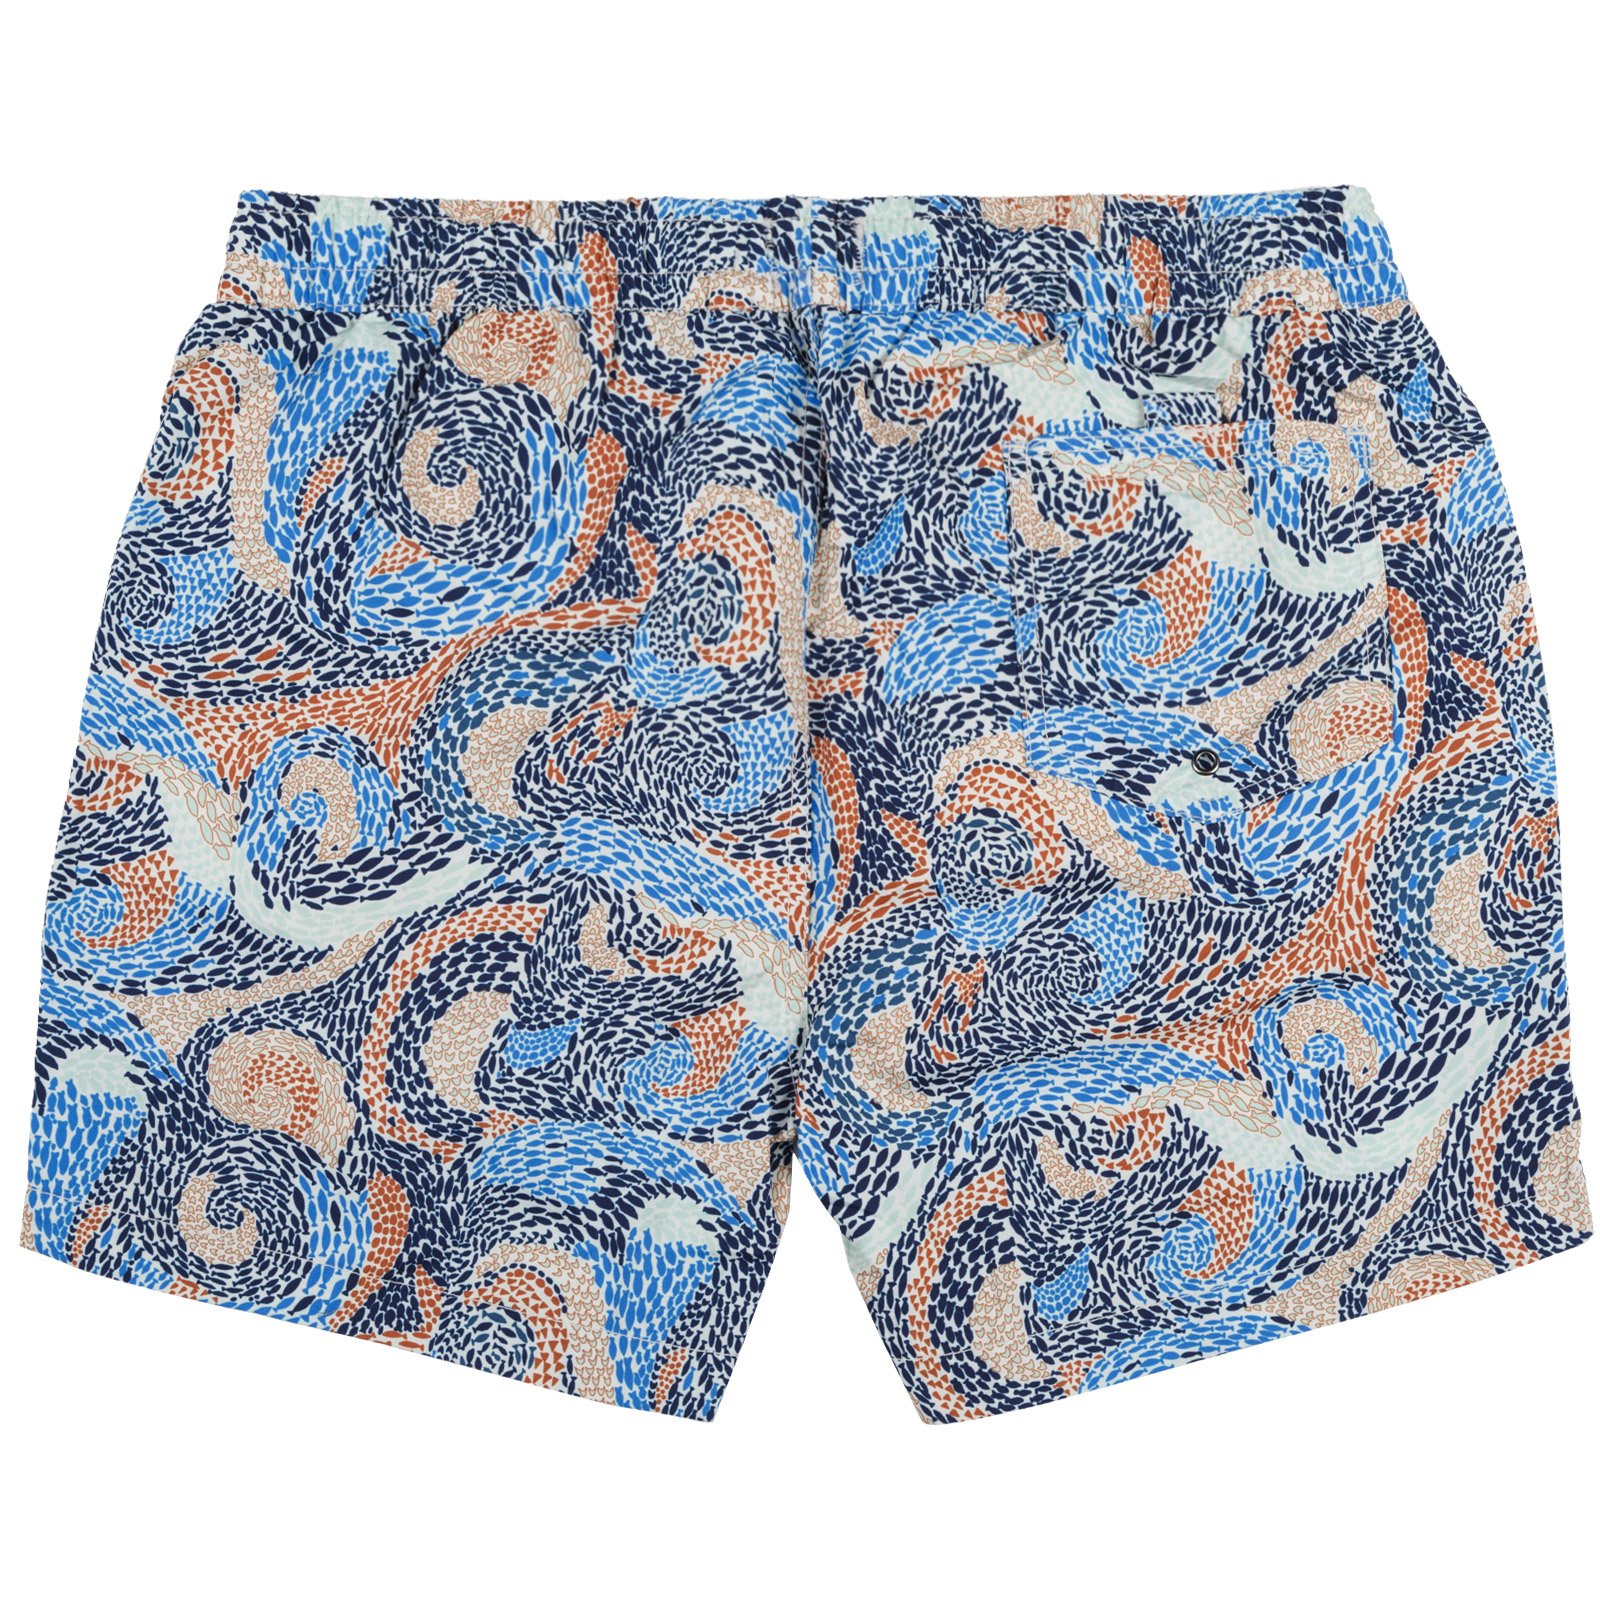 Fish Print Swim Shorts - Gifts : FA2 Online Outlet Store - DSTREZZED 2018SS